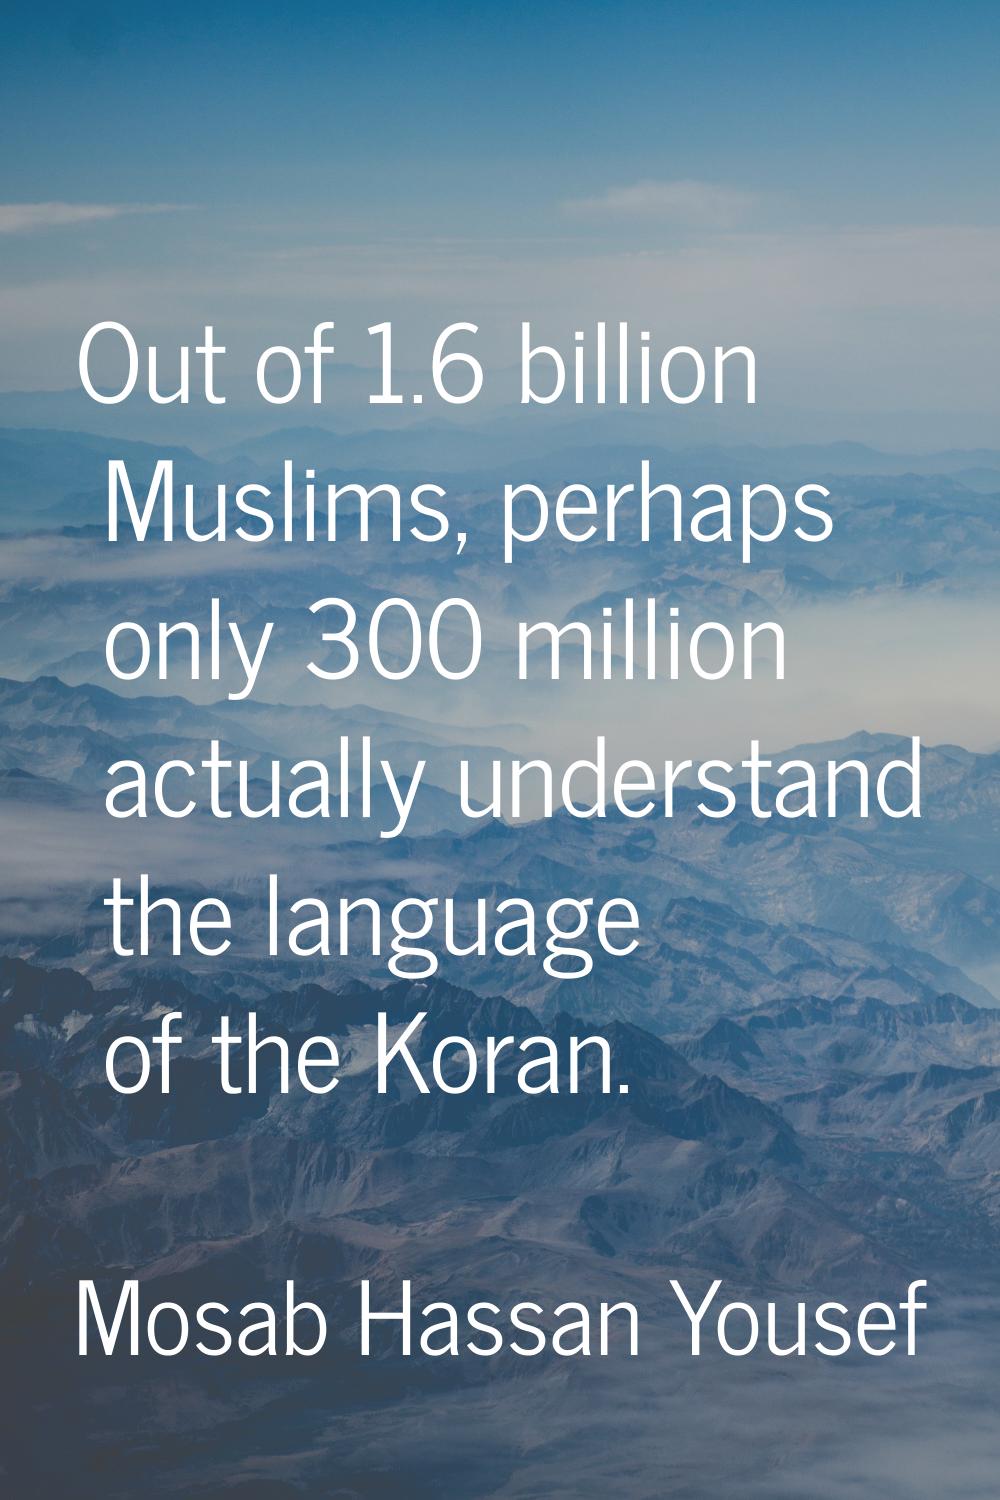 Out of 1.6 billion Muslims, perhaps only 300 million actually understand the language of the Koran.